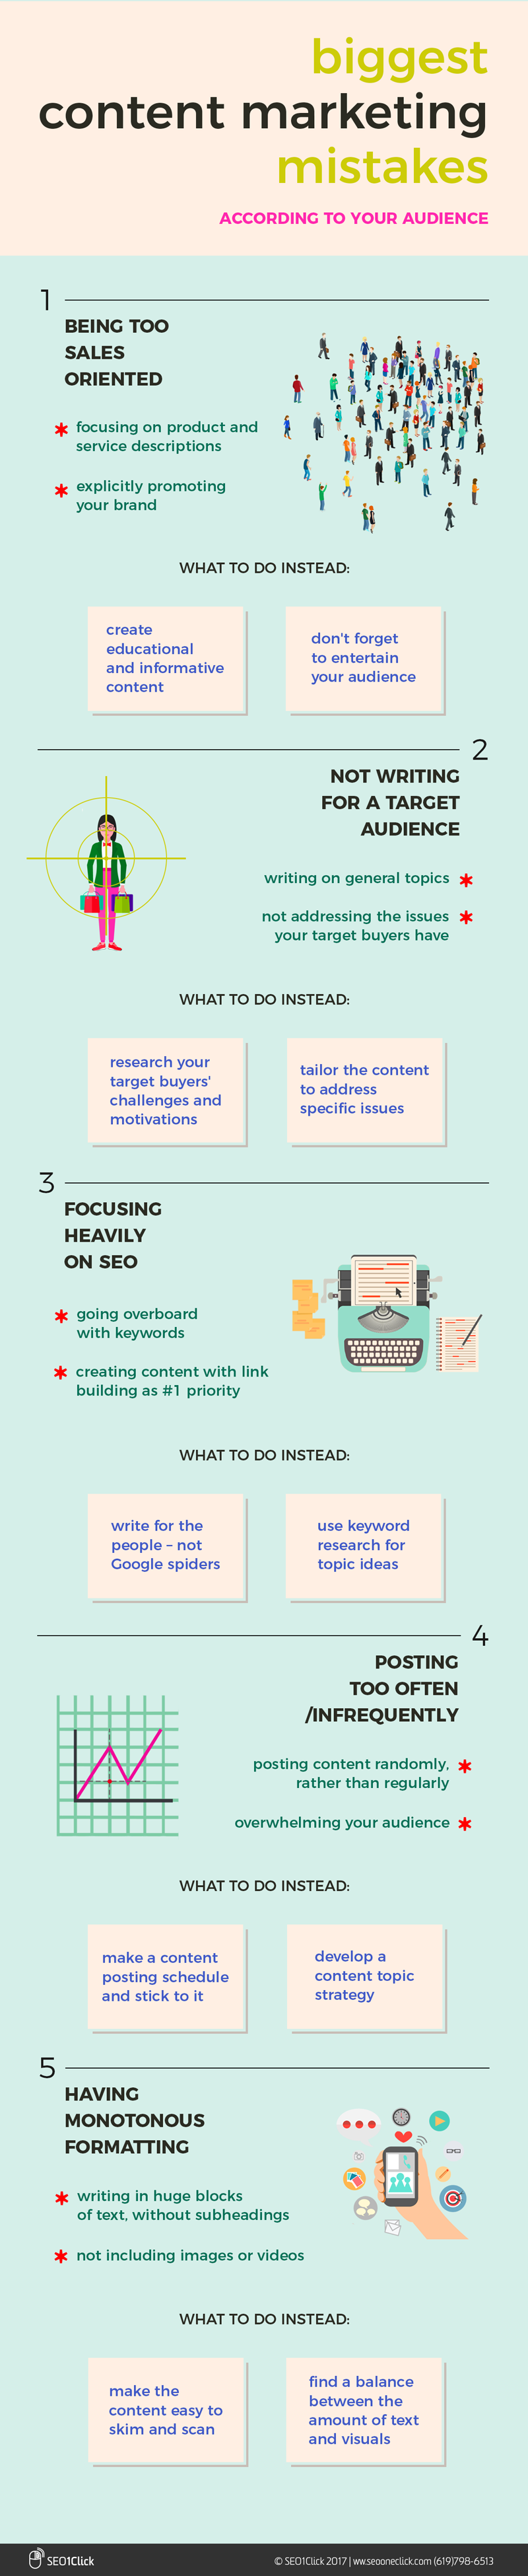 infographic: Content Marketing NO-NOs and What to Do Instead